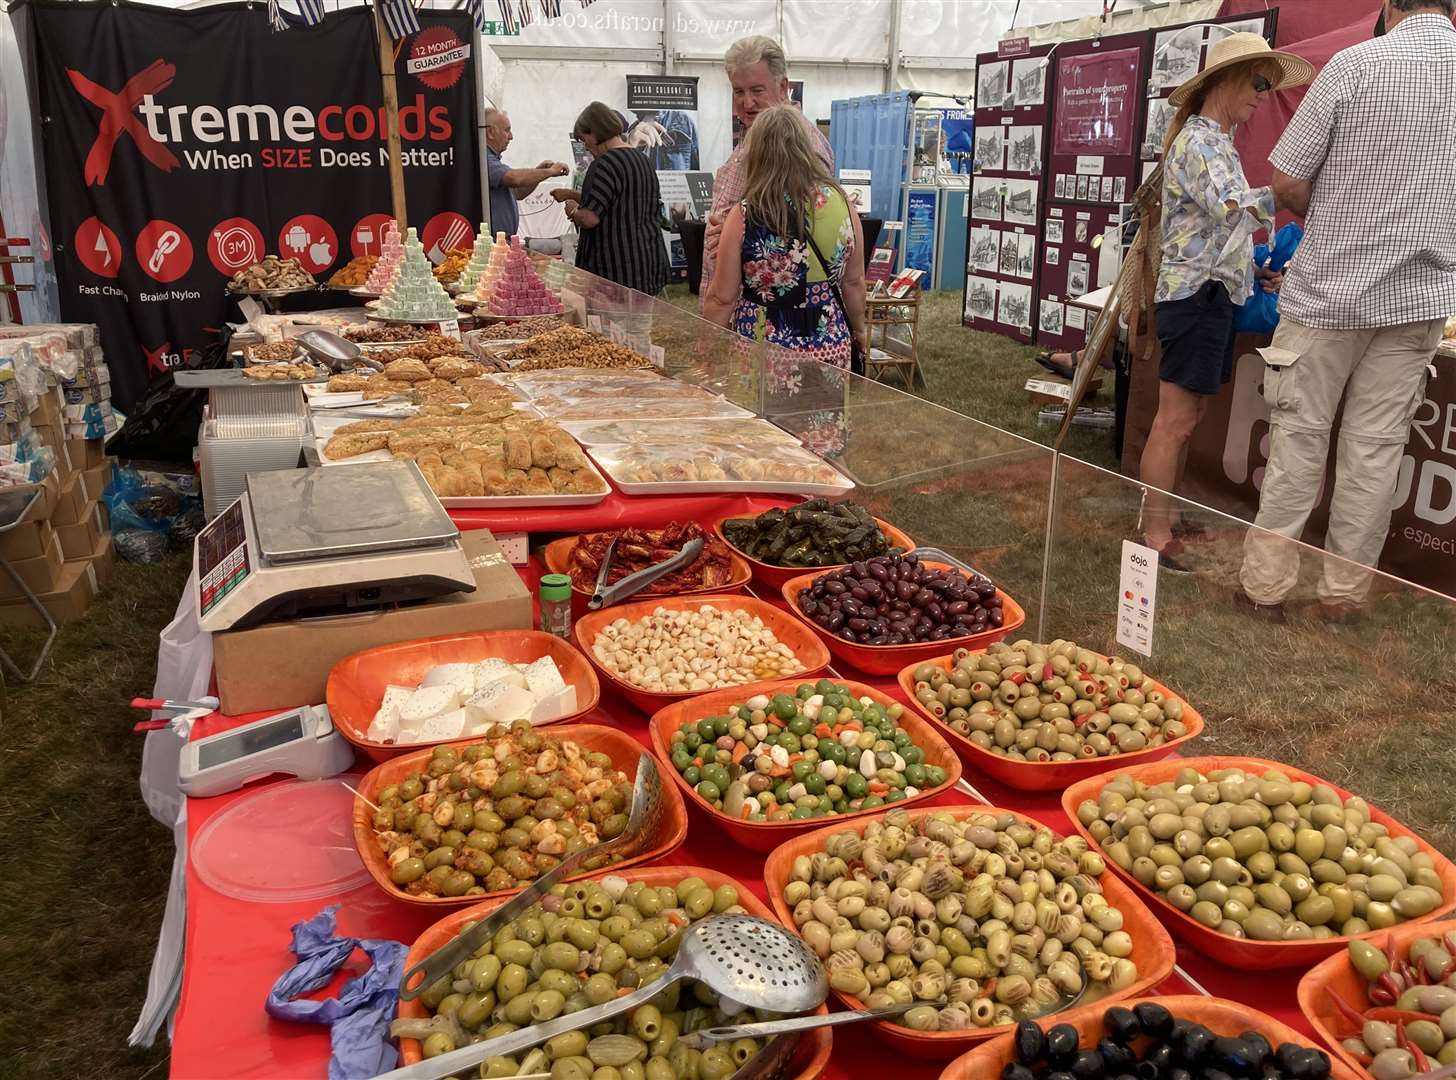 Lots on offer at the County Show